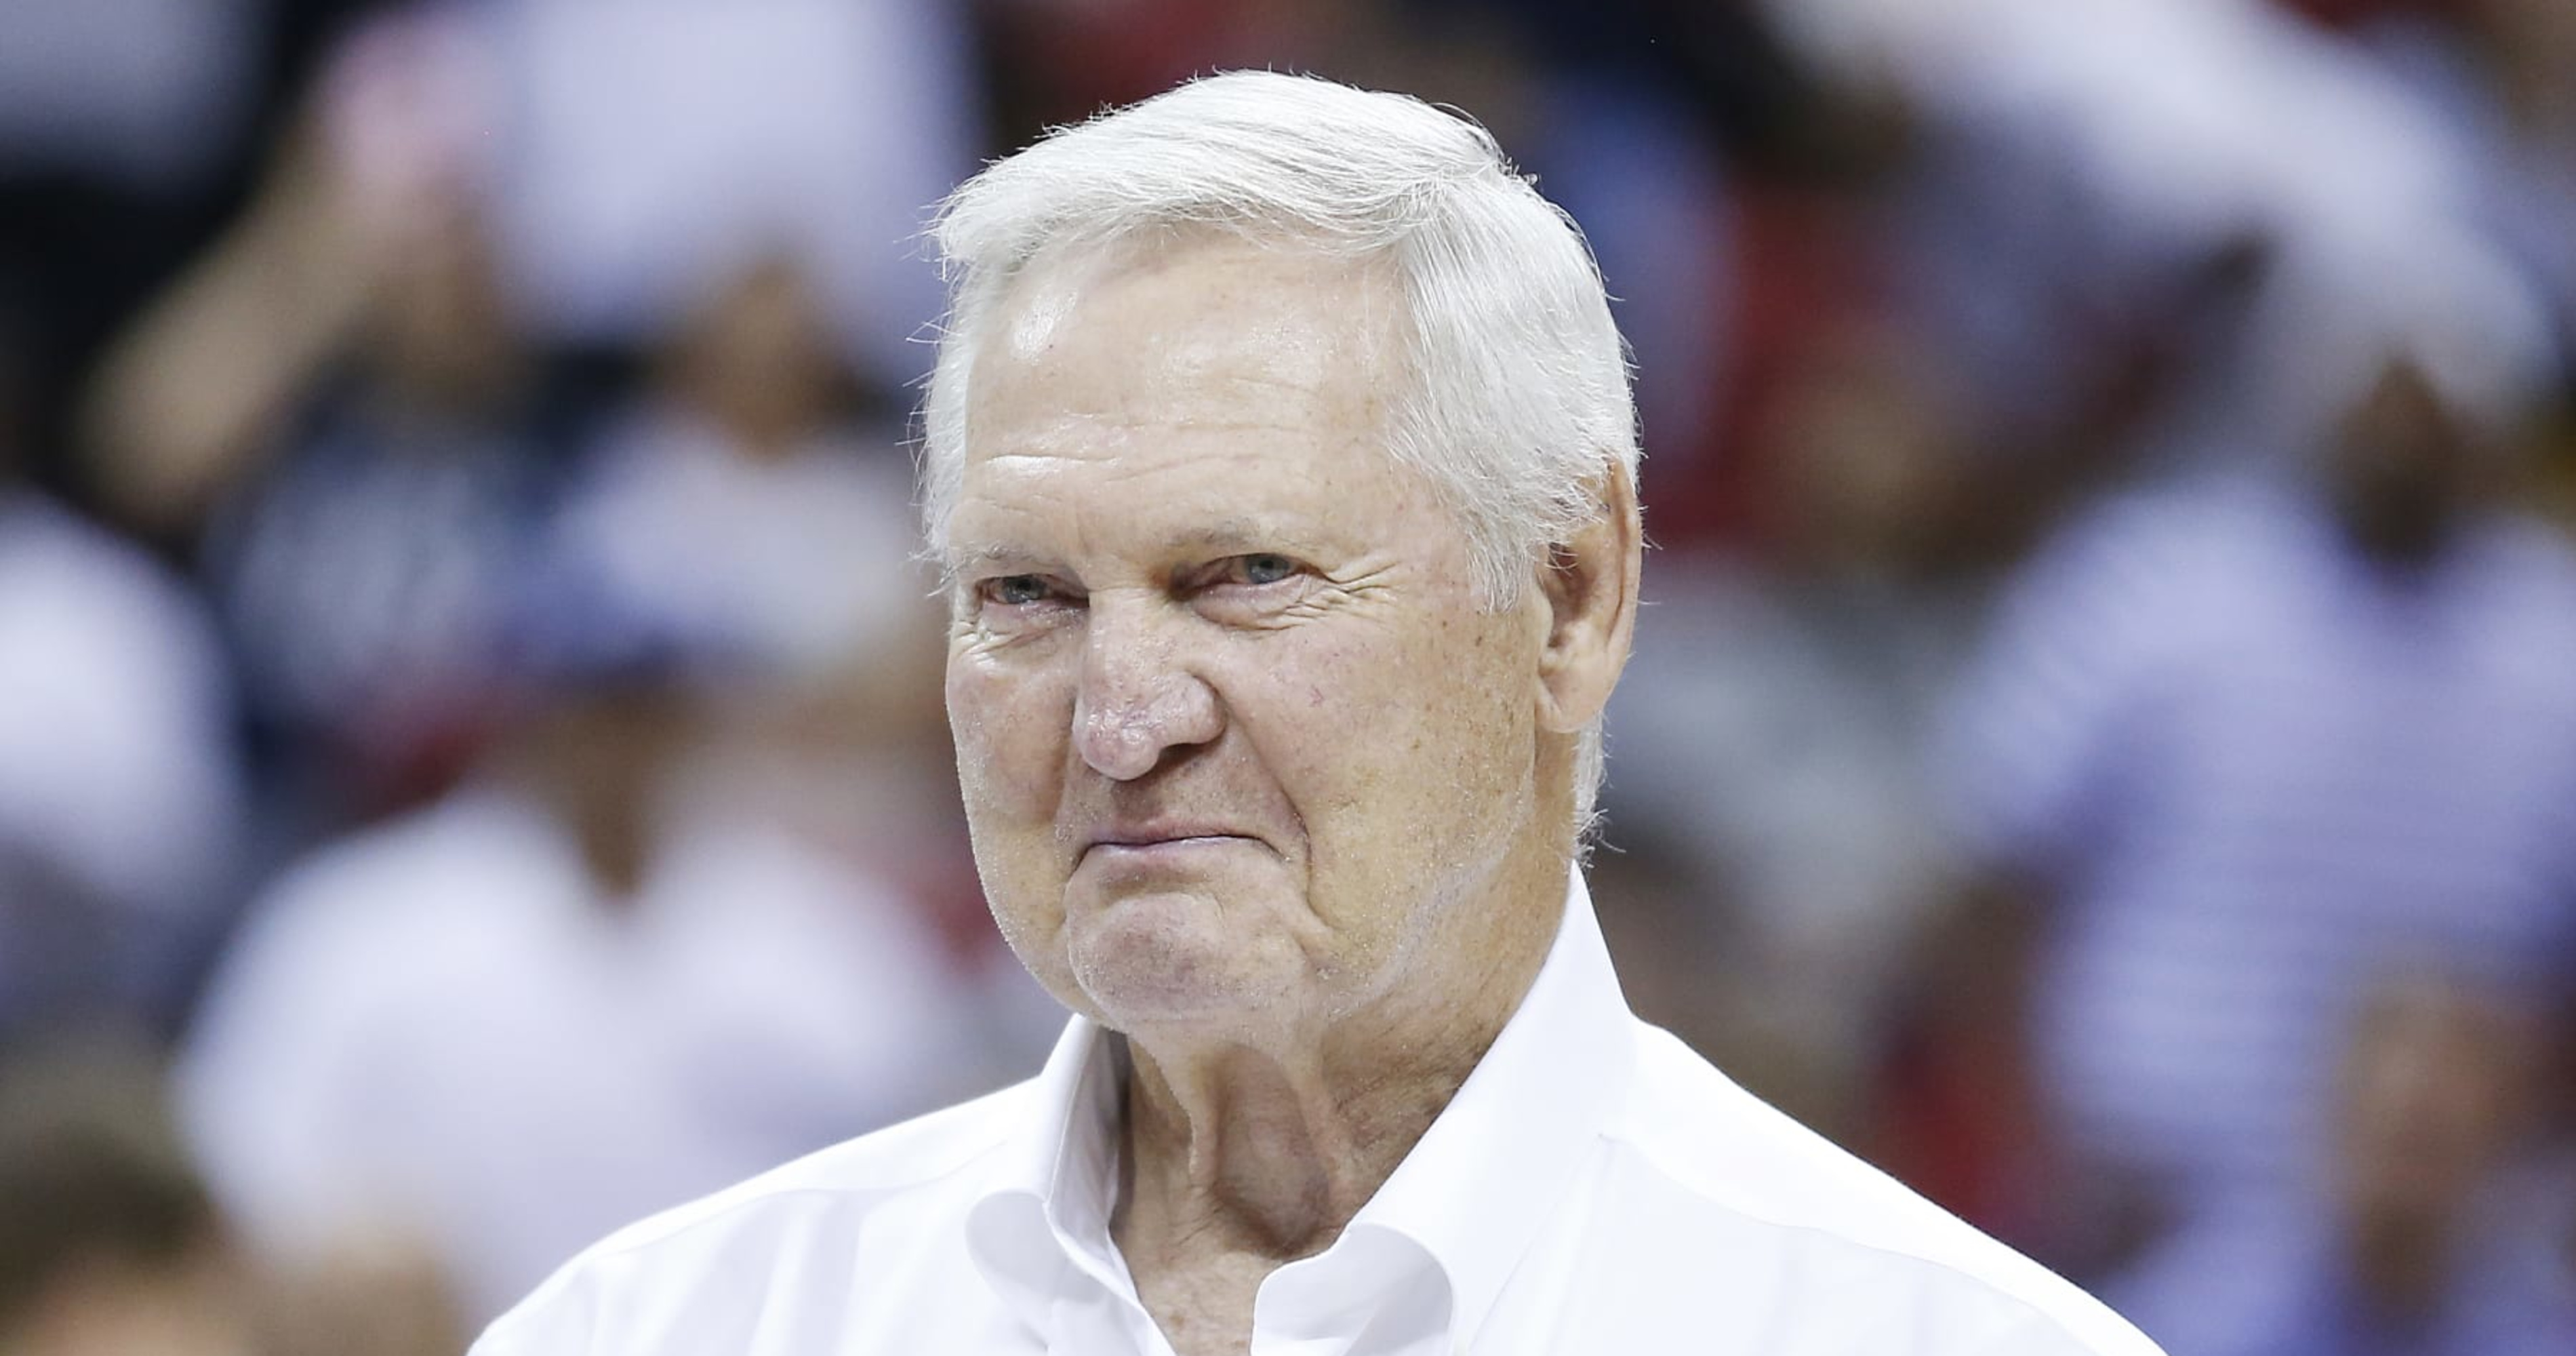 Report: Lakers Legend Jerry West Elected to Basketball HOF for Record 3rd Time